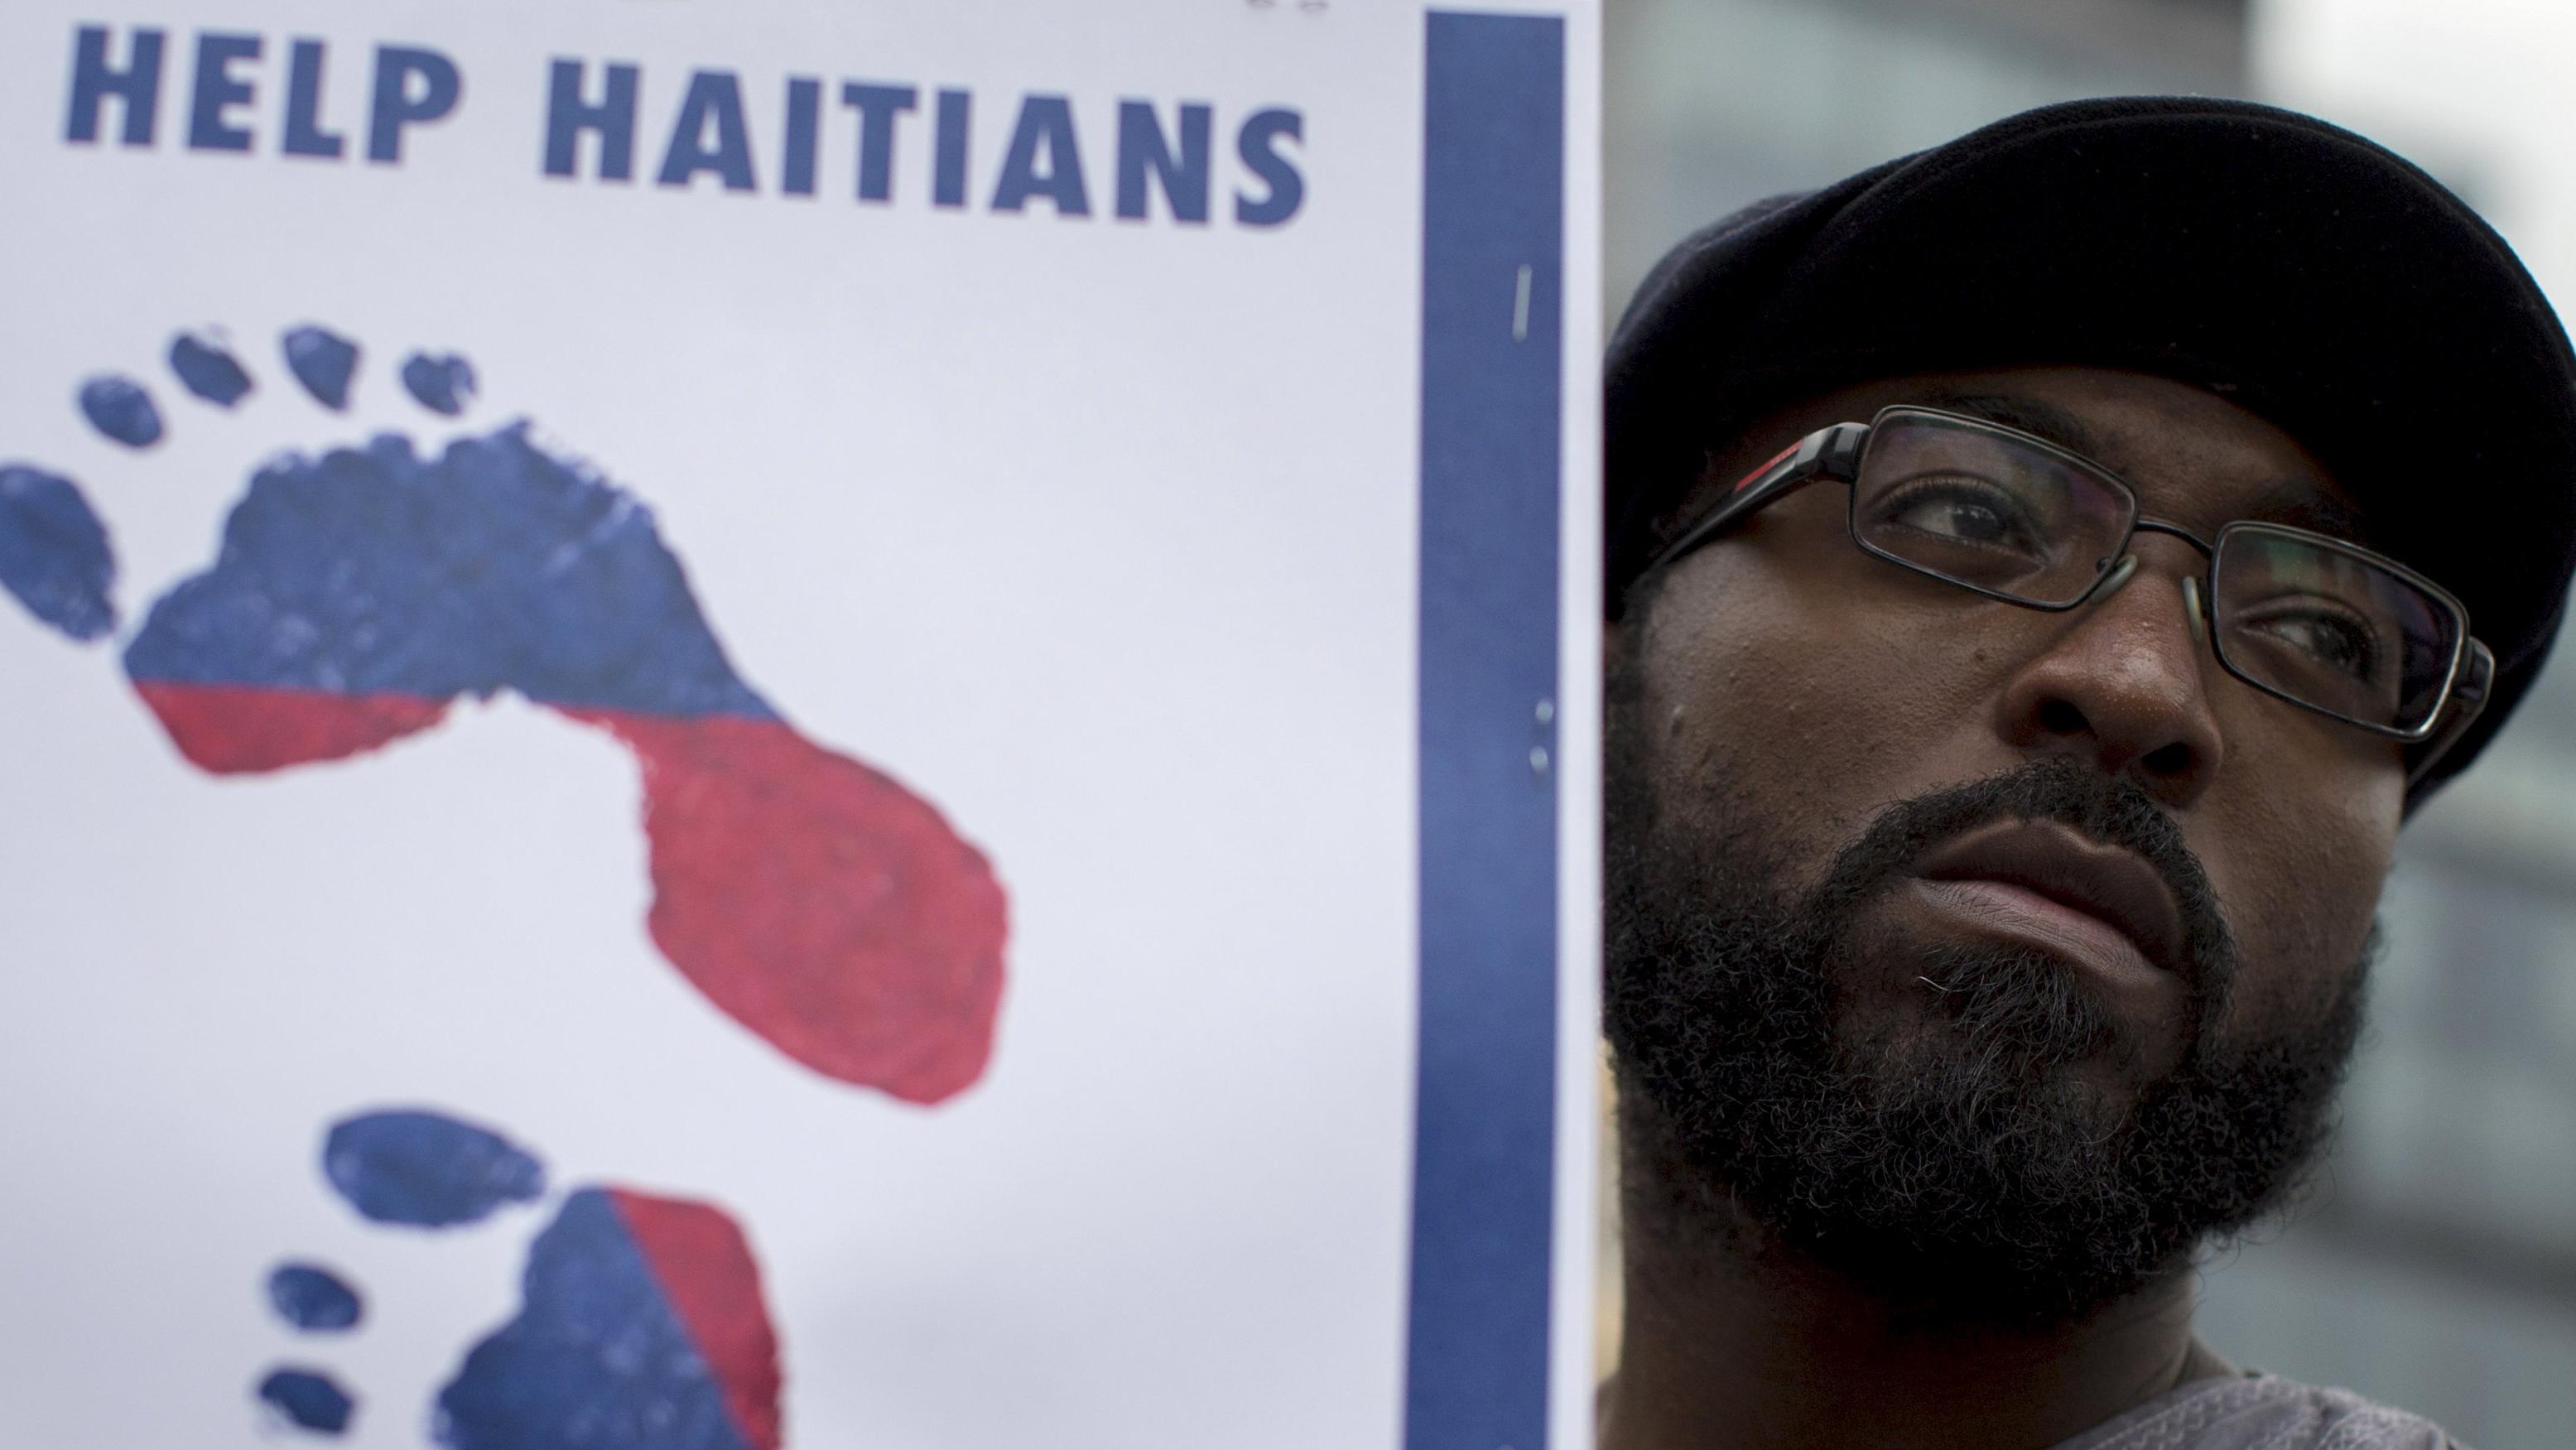 A man attends a demonstration calling for the Dominican Republic to restore citizenship to Dominicans of Haitian descent in New York July 2, 2015.